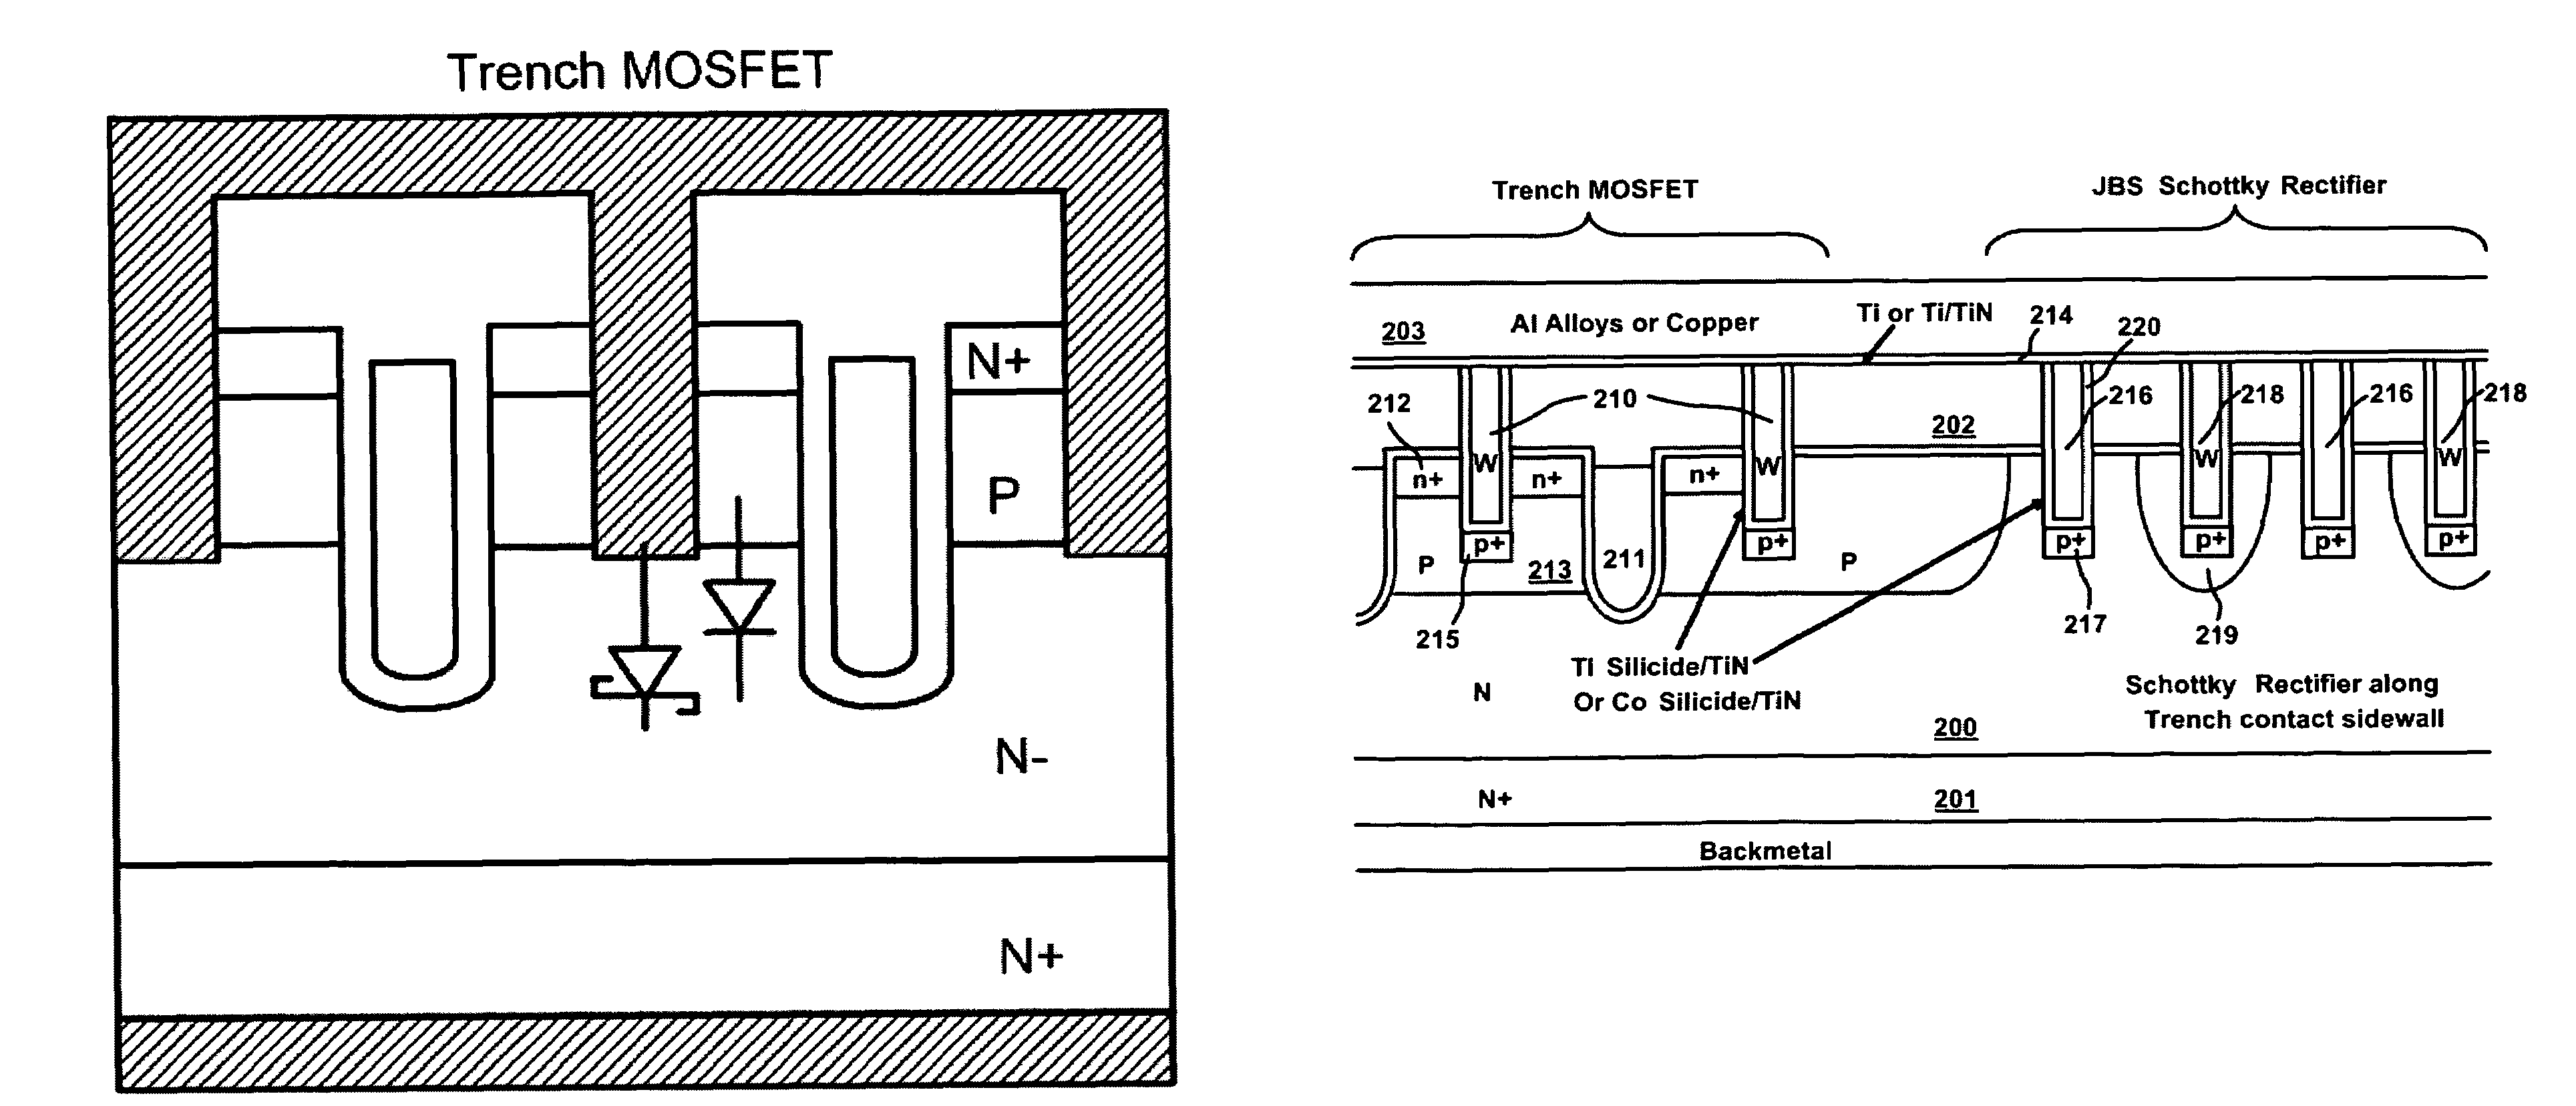 Integrated trench MOSFET and junction barrier schottky rectifier with trench contact structures